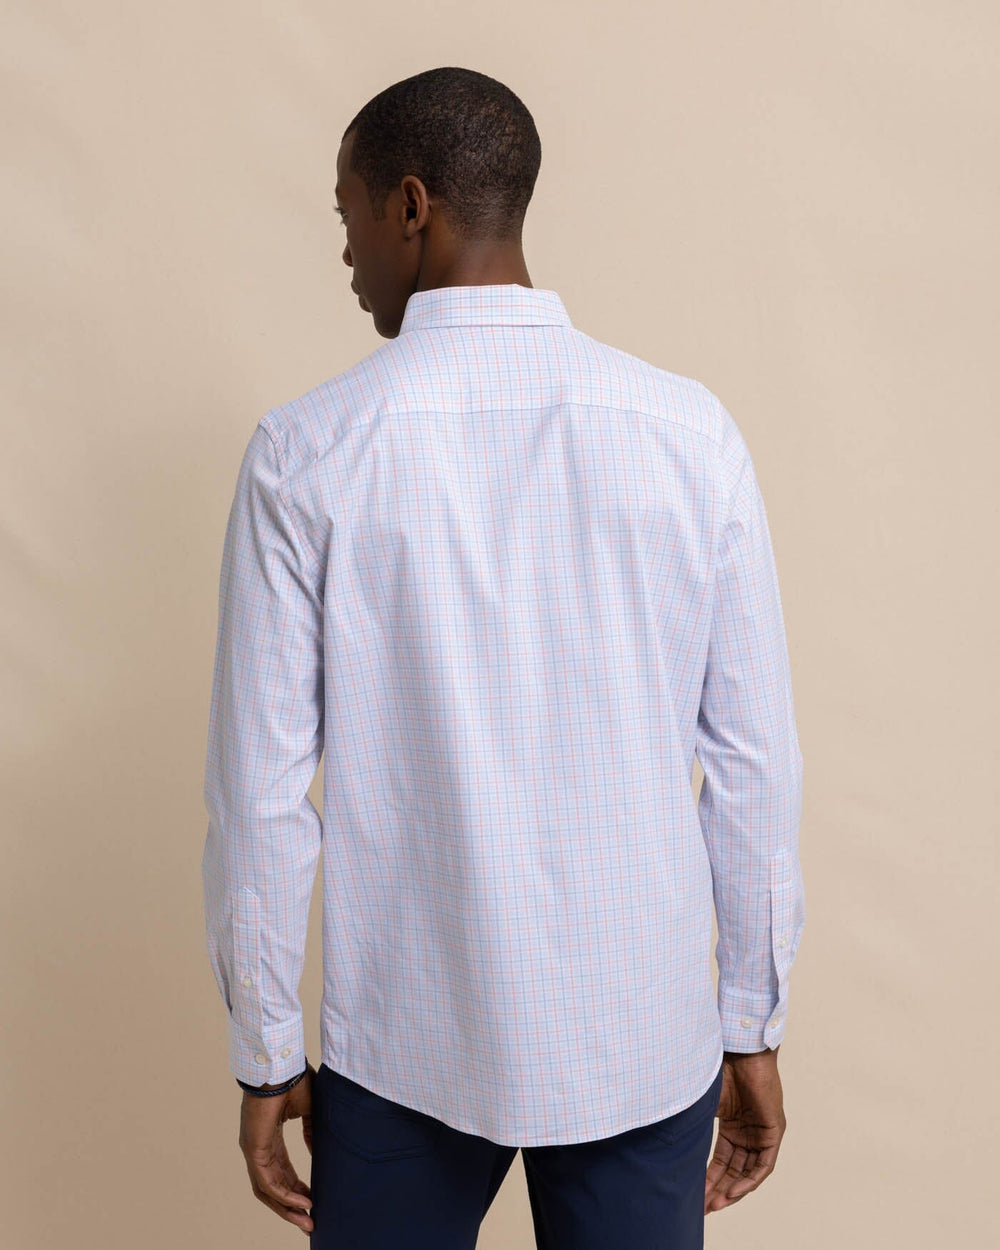 The back view of the Southern Tide Intercoastal Falls Park Plaid Long Sleeve SportShirt by Southern Tide - Clearwater Blue